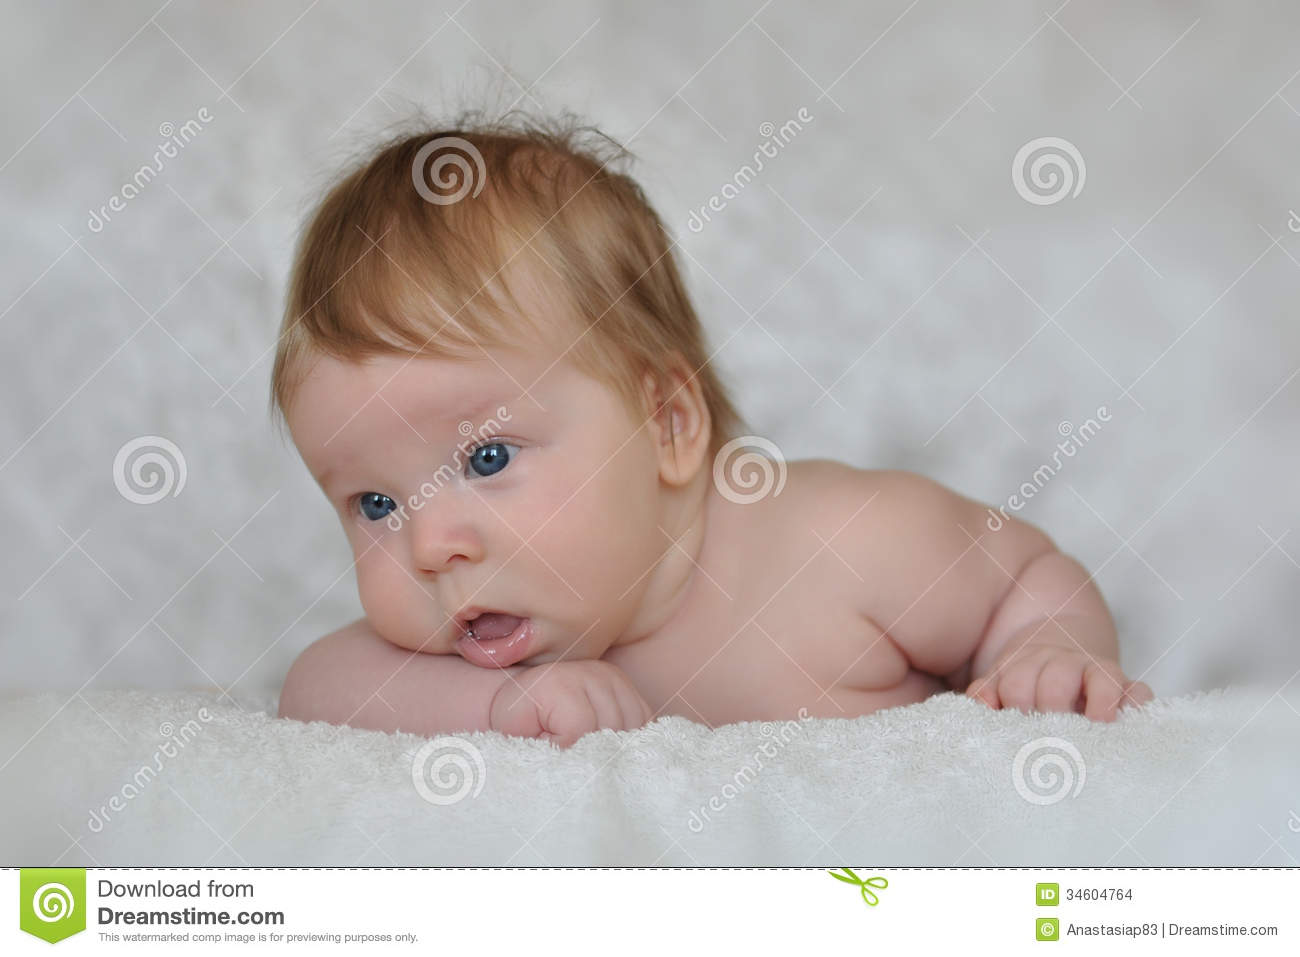 Little Girl Is Tired Of Holding Her Head Stock Images   Image